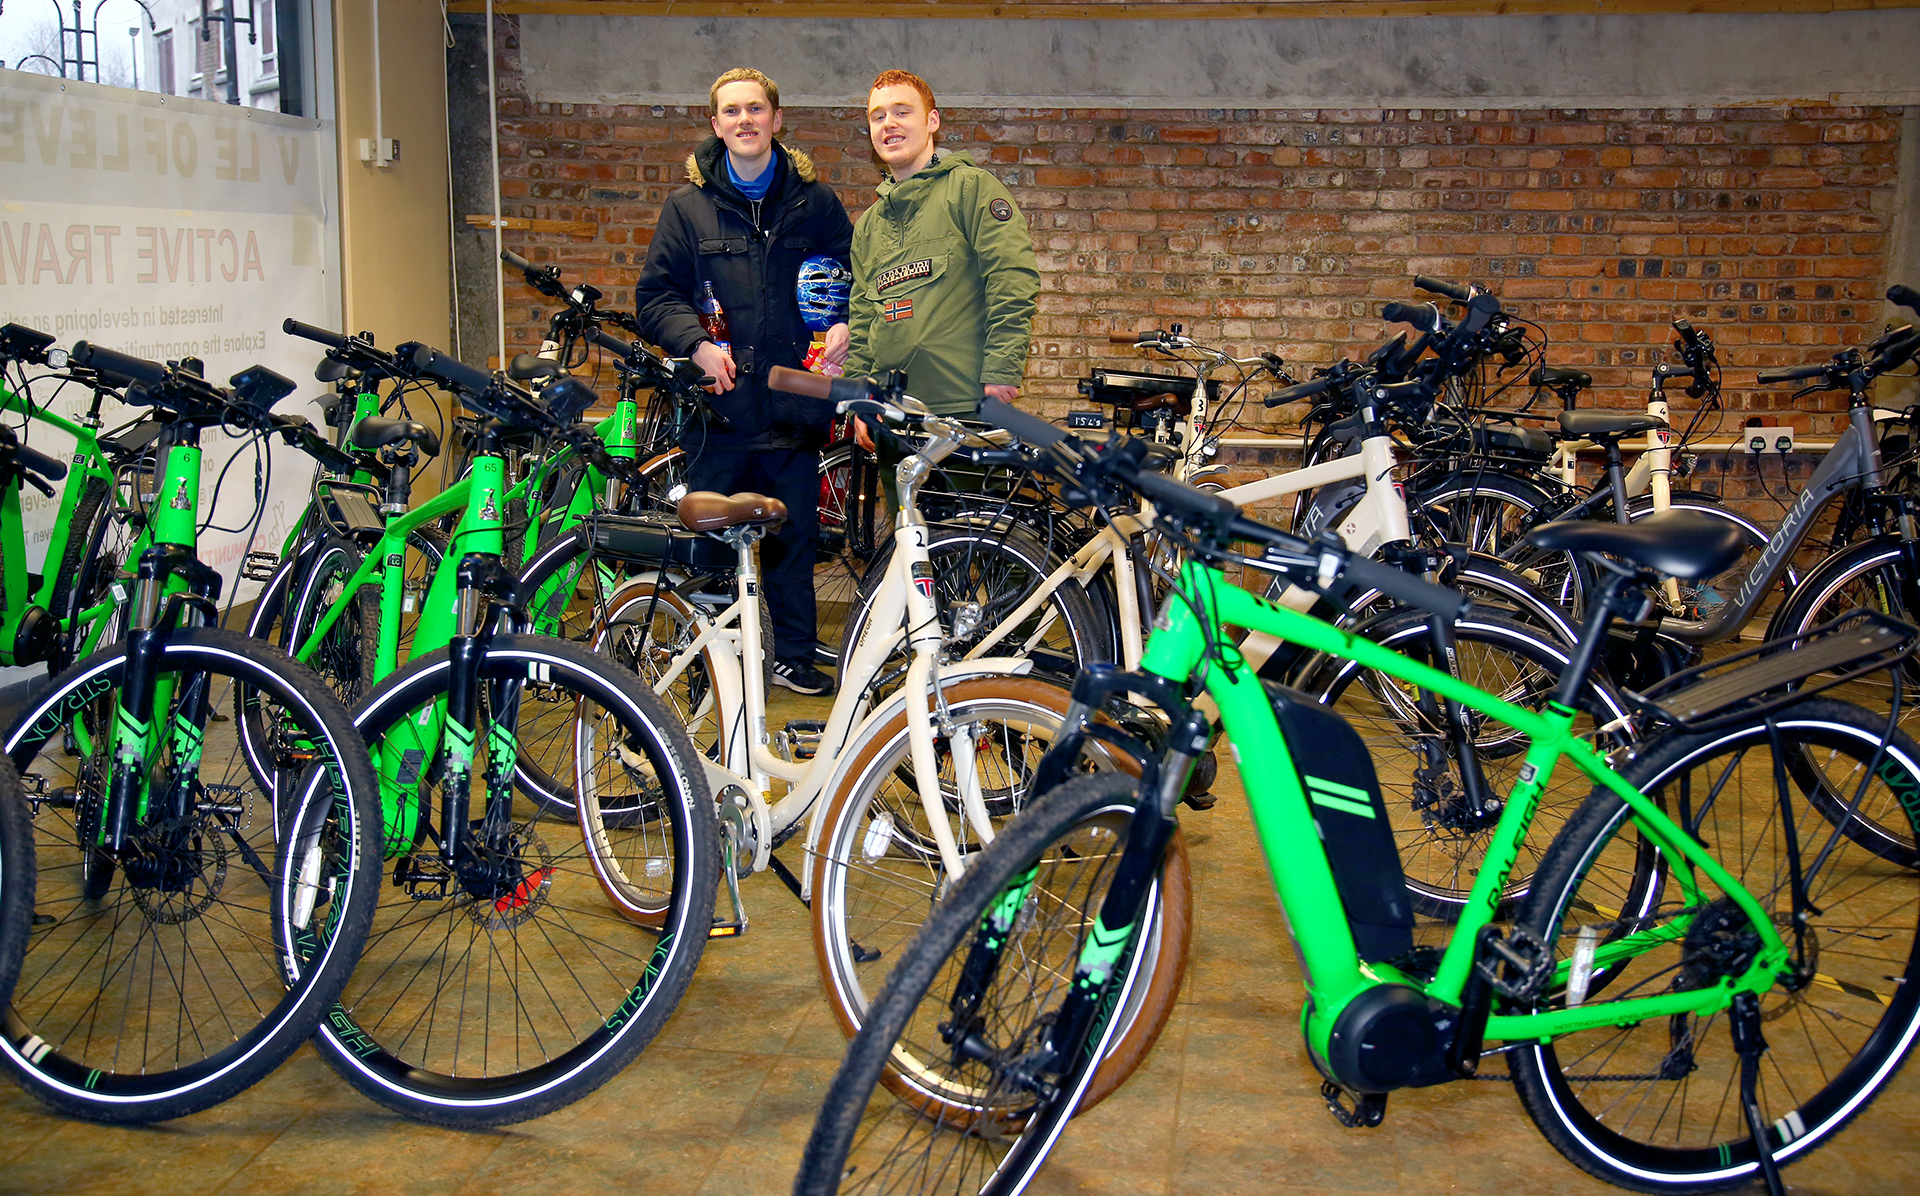 The Trust applied for funding to buy 20 “state-of-the-art” electric bikes